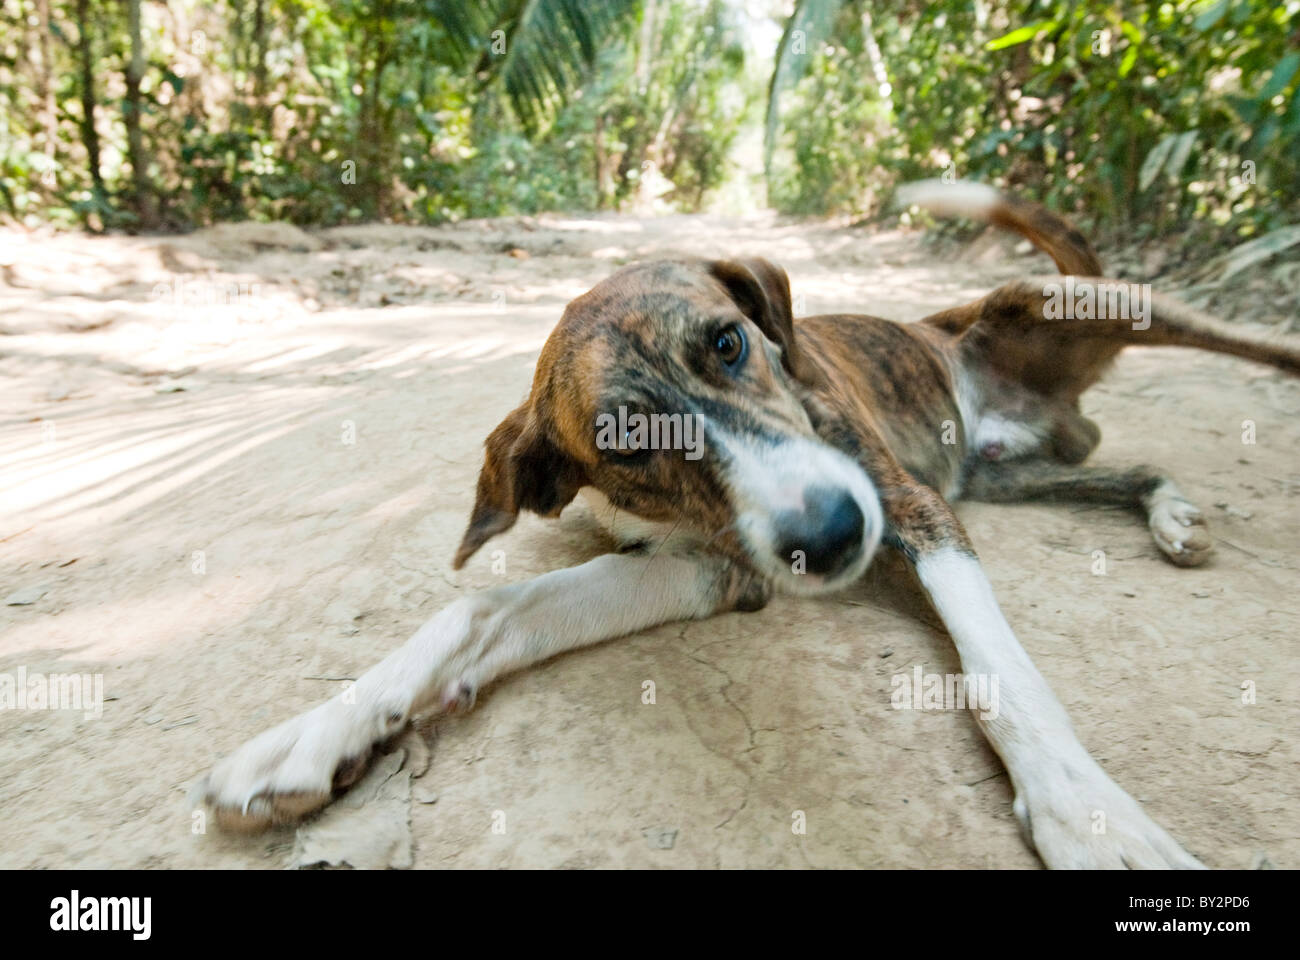 Page 10 - Dog Belly Not Pregnant High Resolution Stock Photography and  Images - Alamy